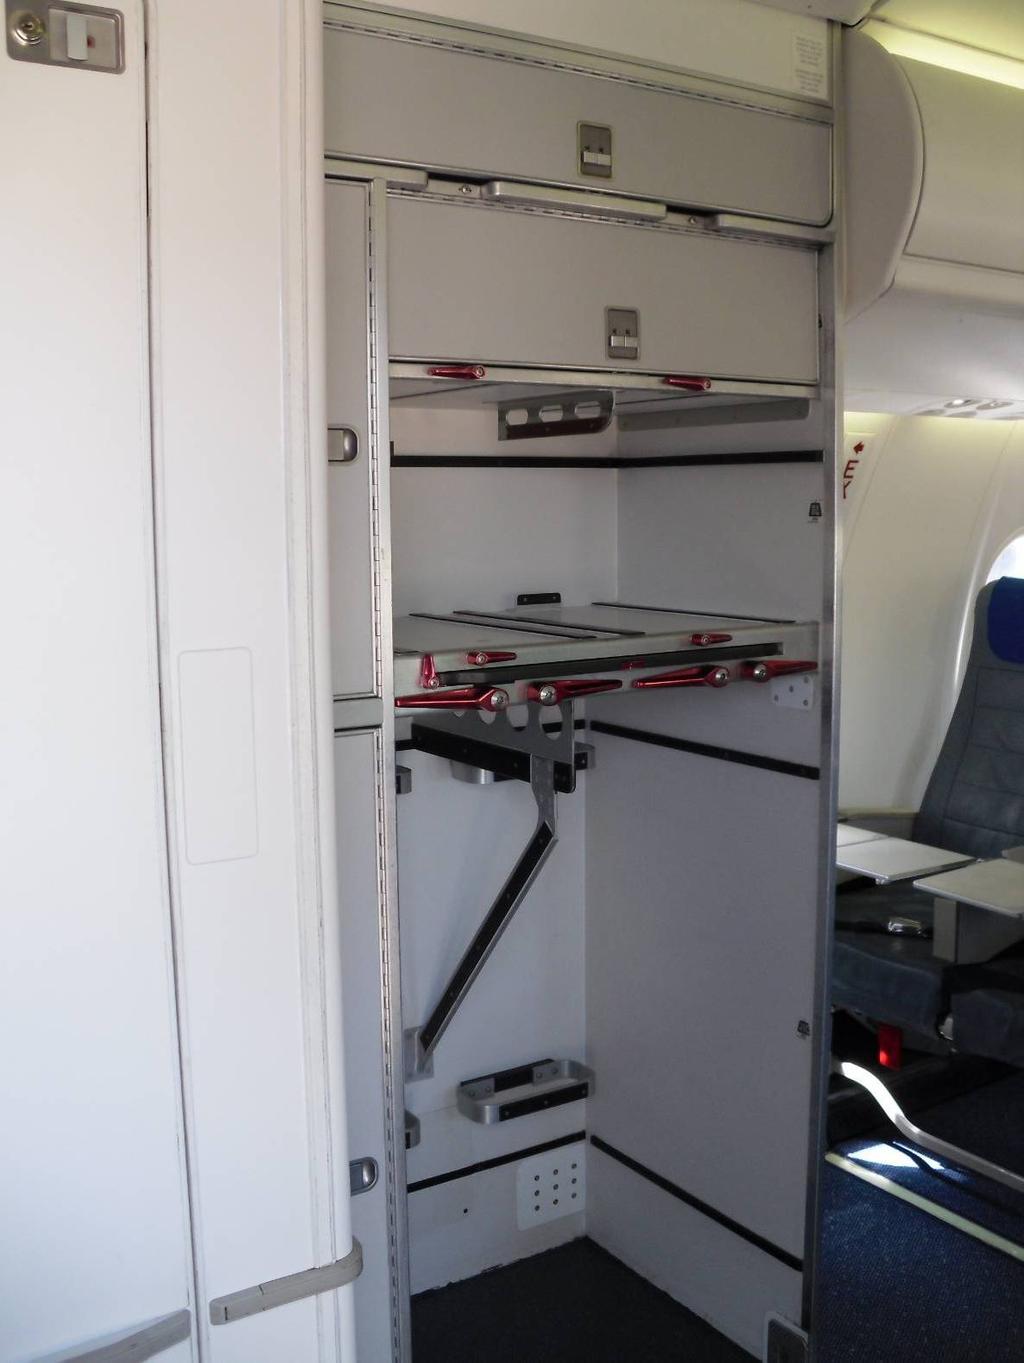 Q400 Serial Number 4051 Available for Sale G6 Galley IMPORTANT: The equipment specifications set forth herein are based on information provided by the last operator of the aircraft, and are current